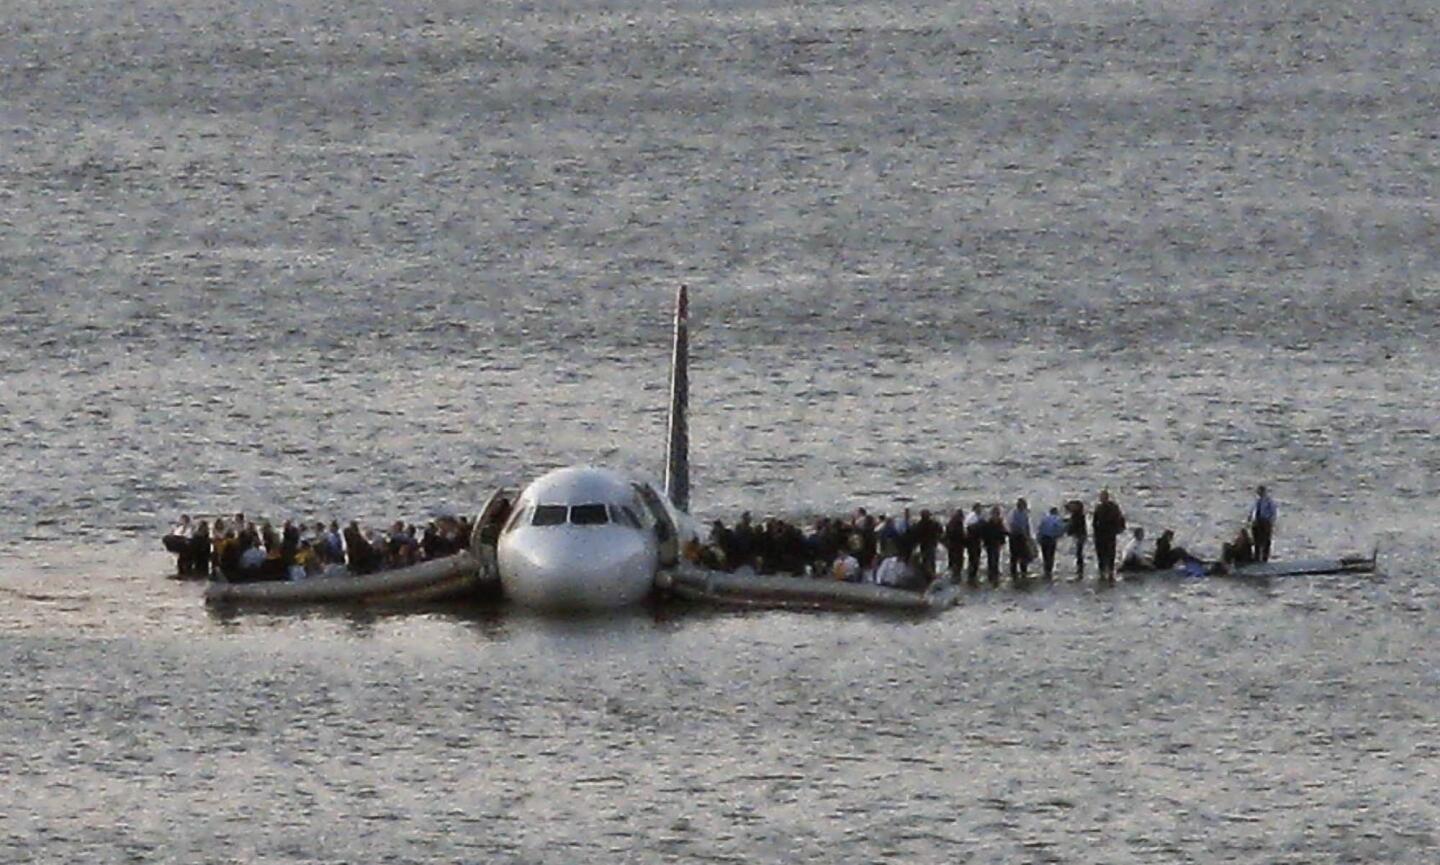 Airline passengers wait on the wings of a US Airways Airbus A320 to board a ferry after the jetliner safely landed in the Hudson River in New York.